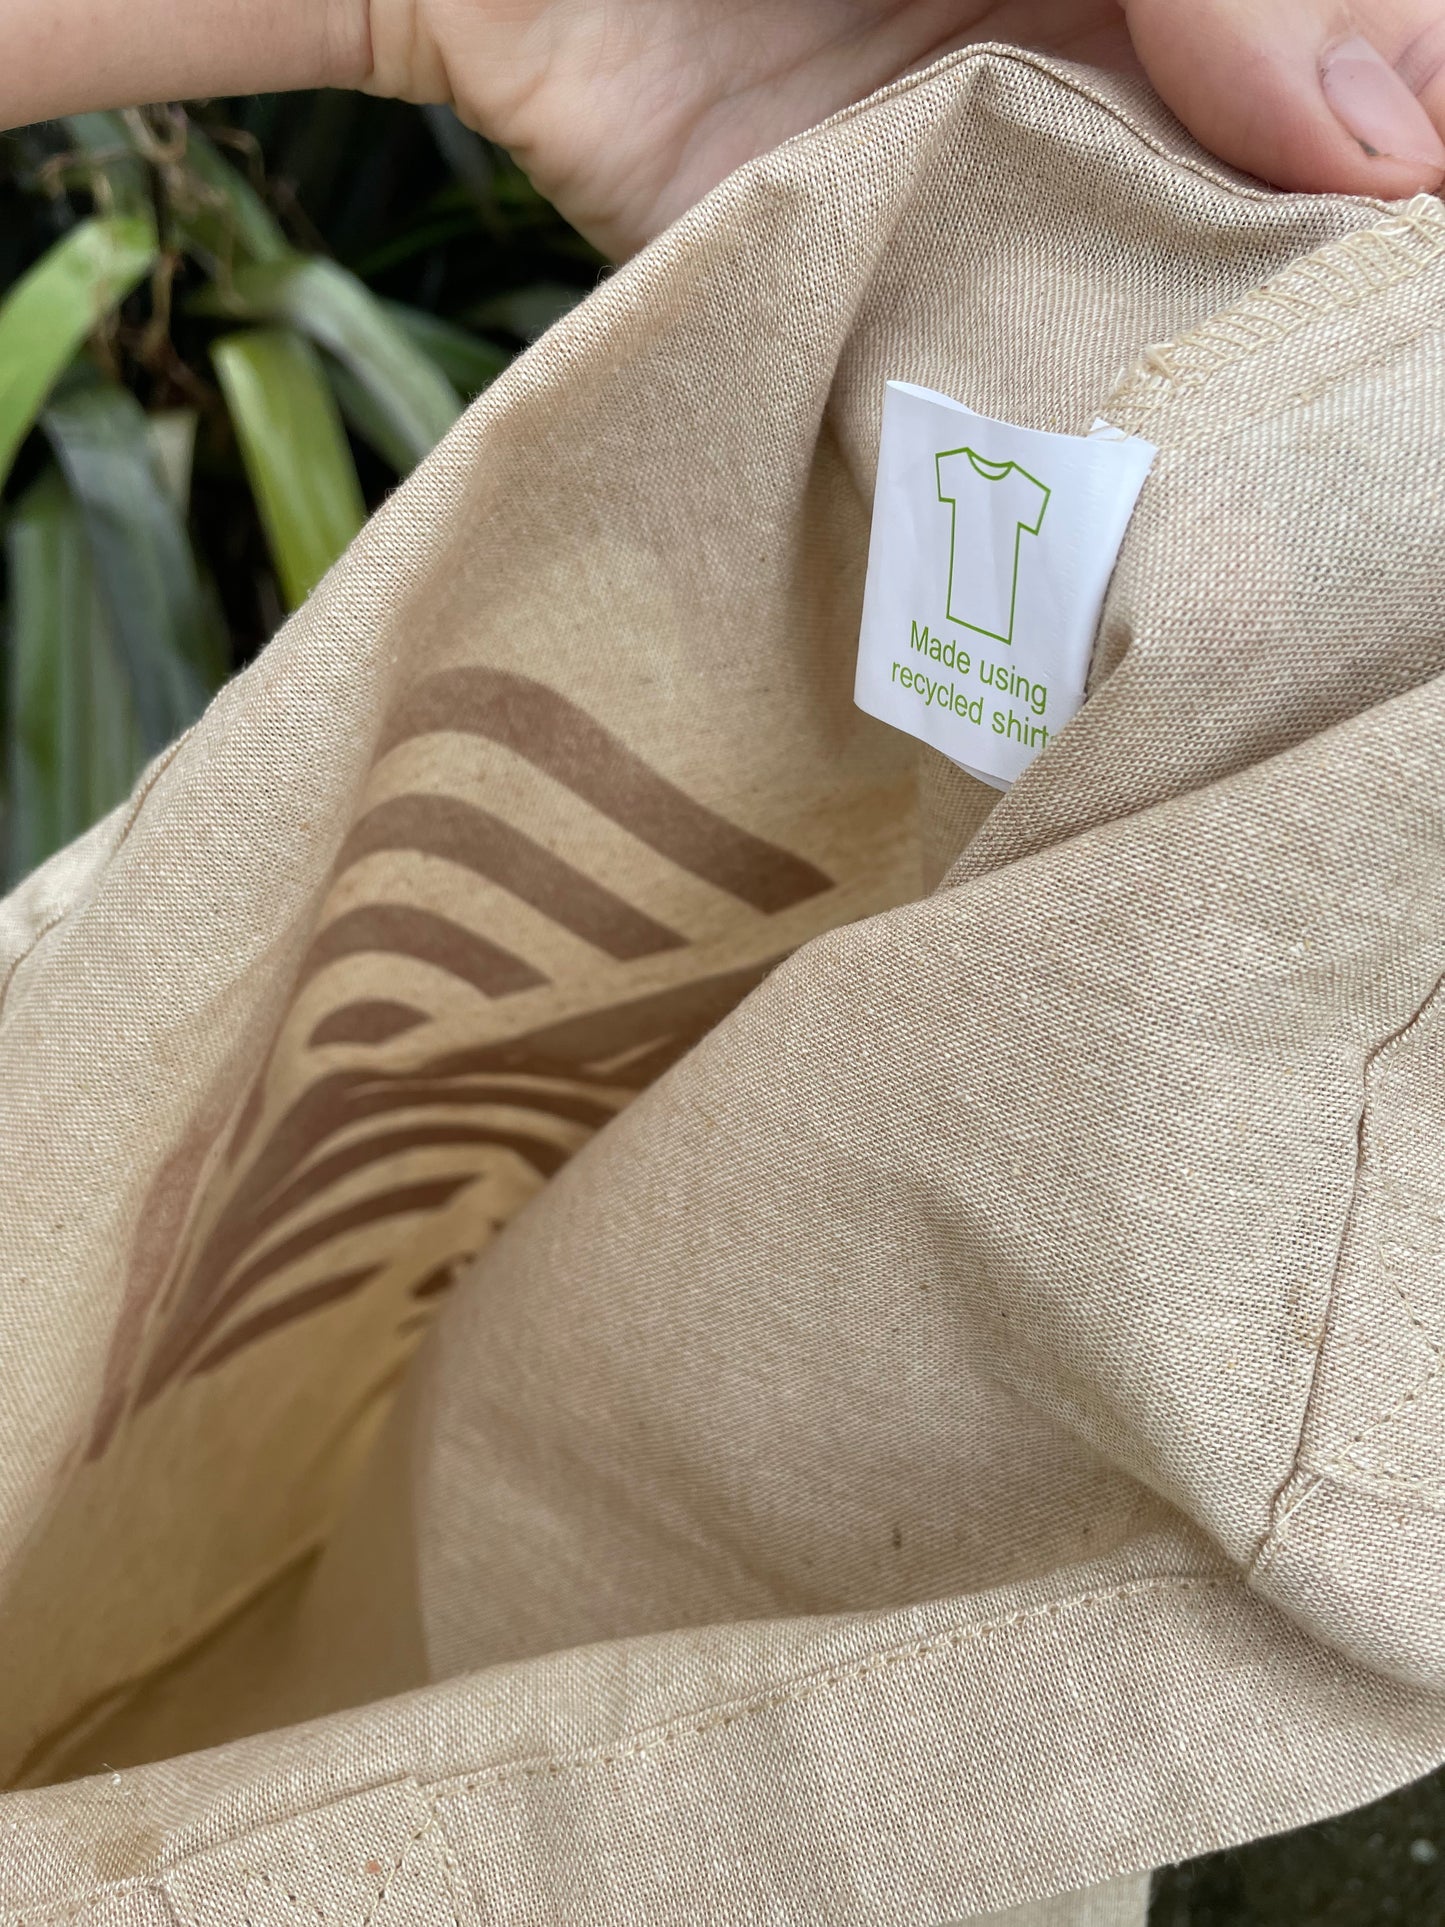 Little farms supporters tote